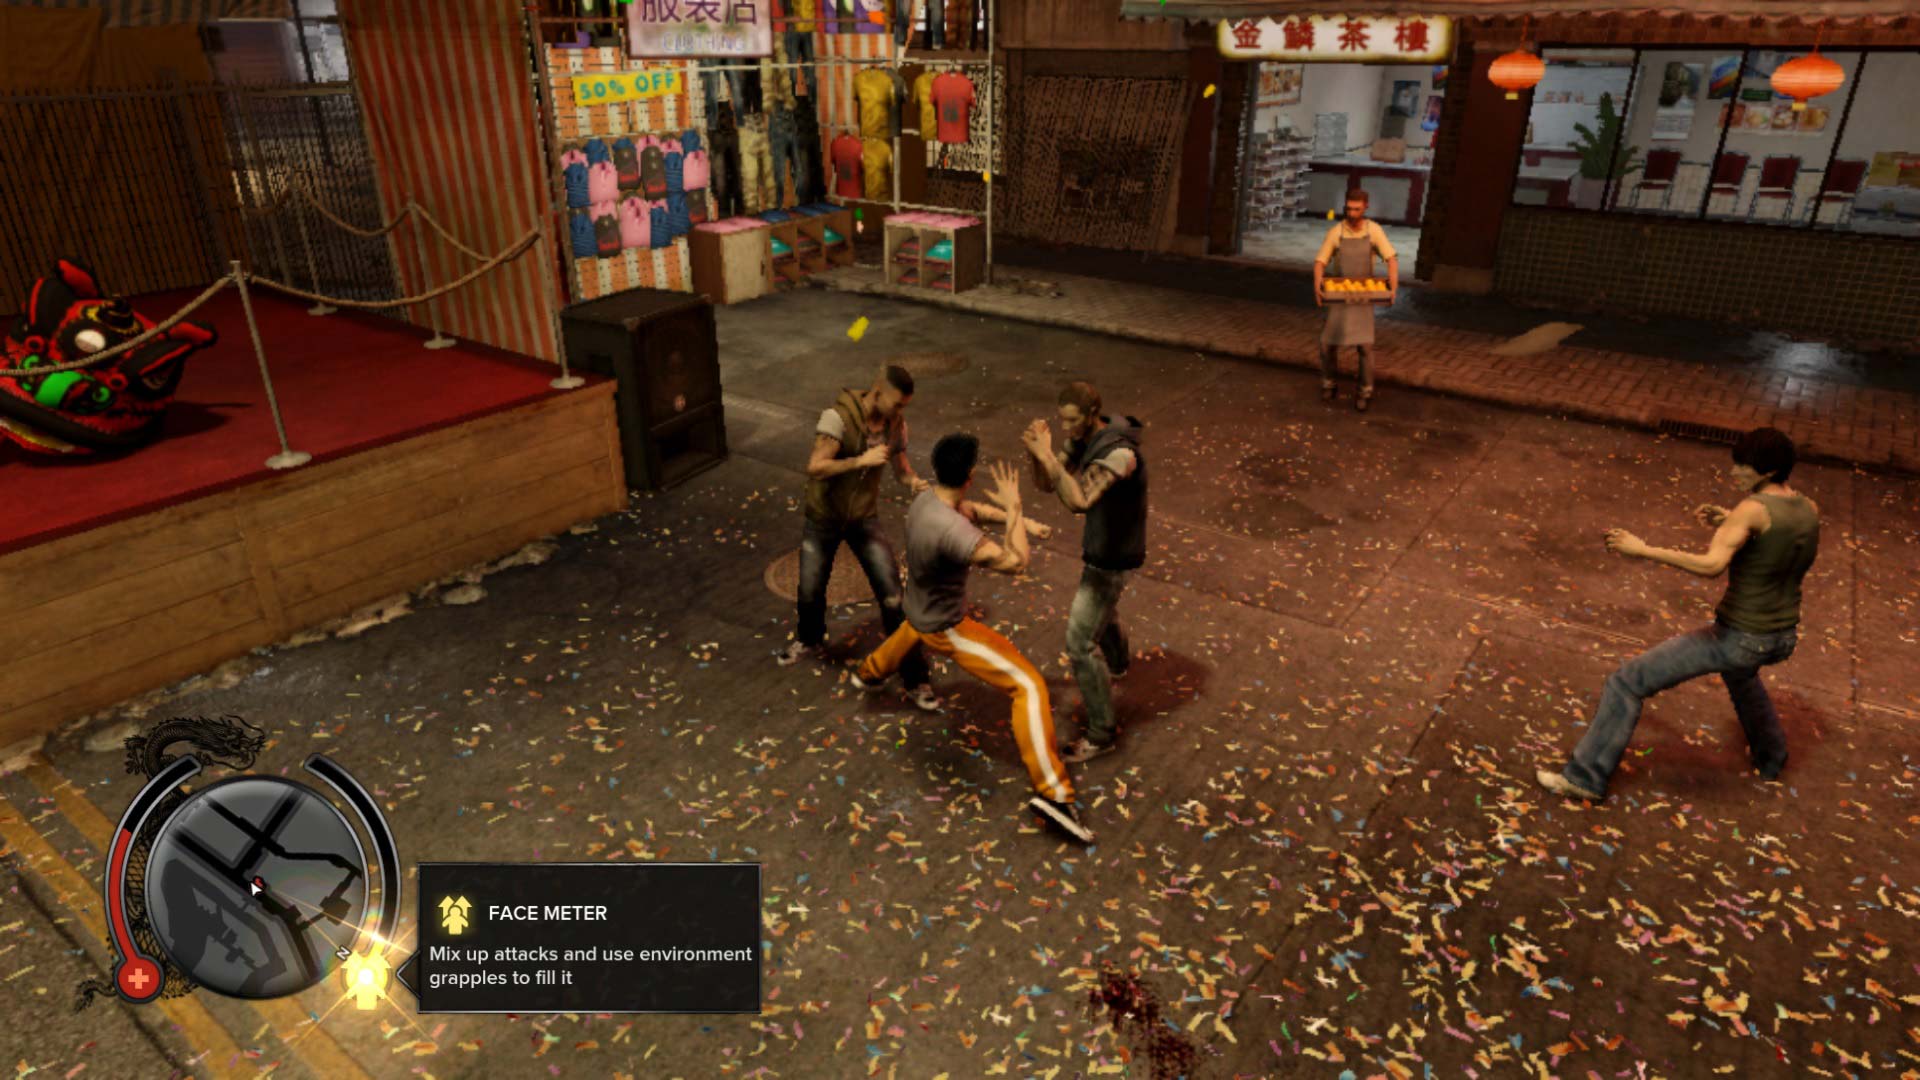 Download Game Sleeping Dogs Pc Full Version Torrent